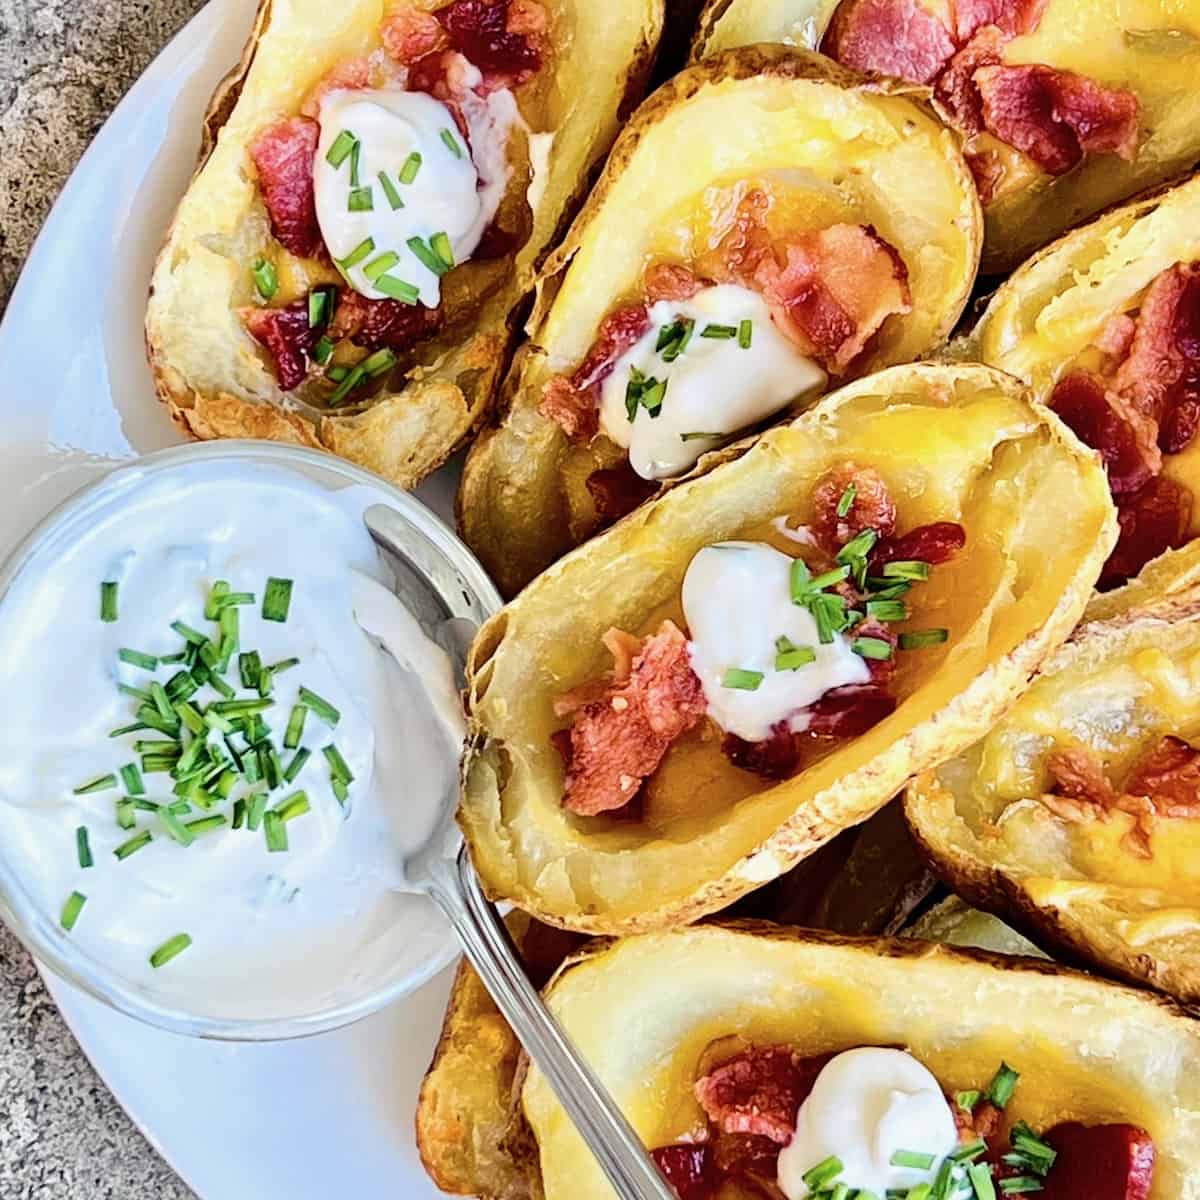 Homemade Potato skins made with air fryer baked russet potatoes.